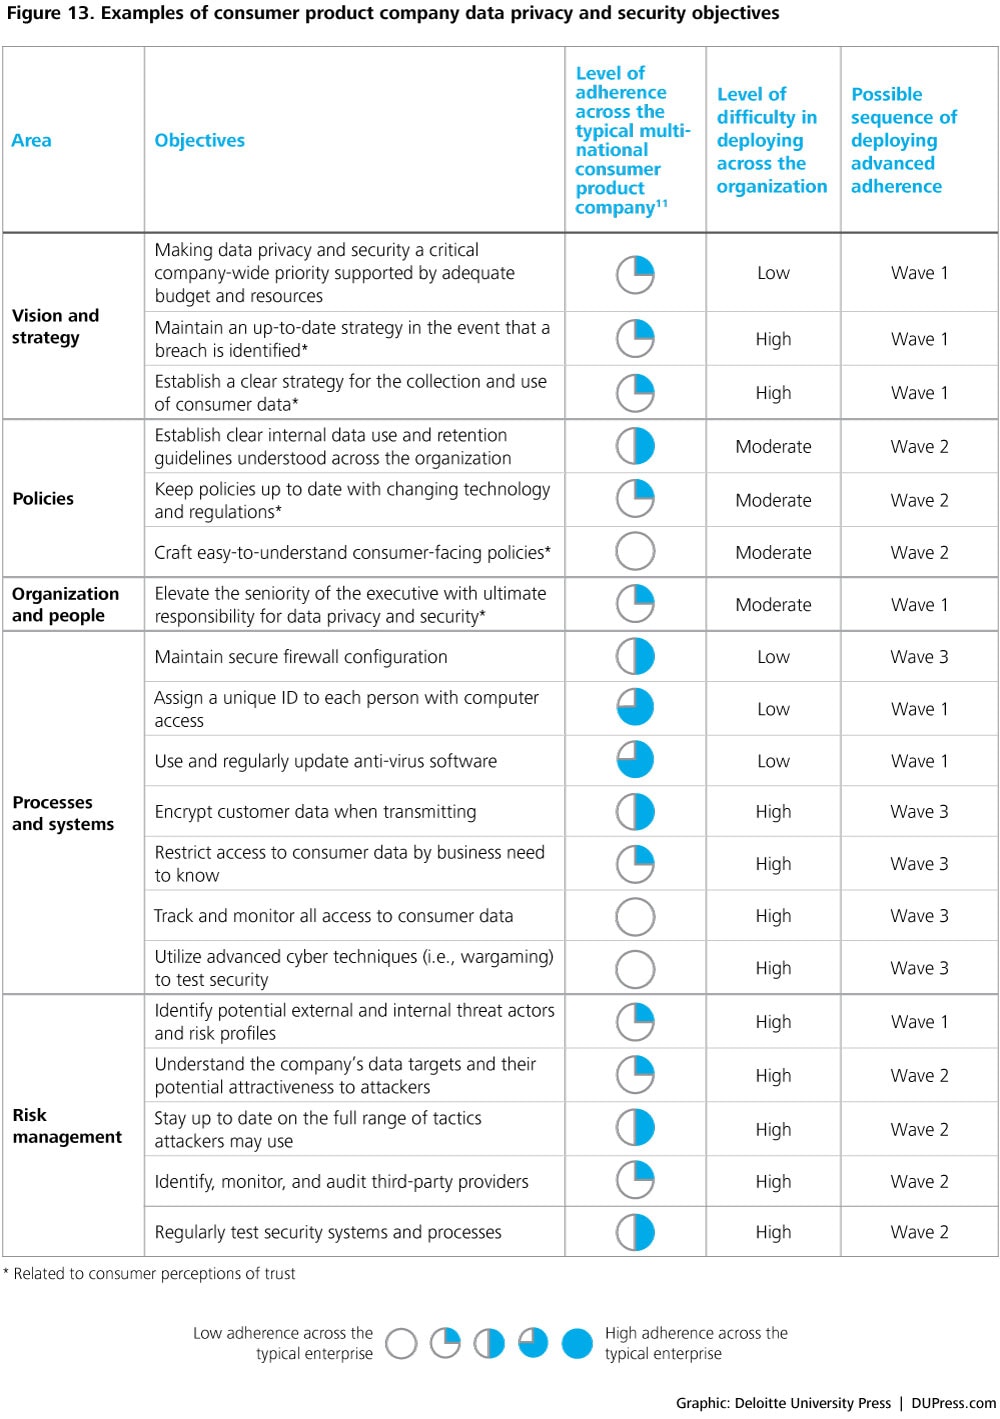 Figure 13. Examples of consumer product company data privacy and security objectives